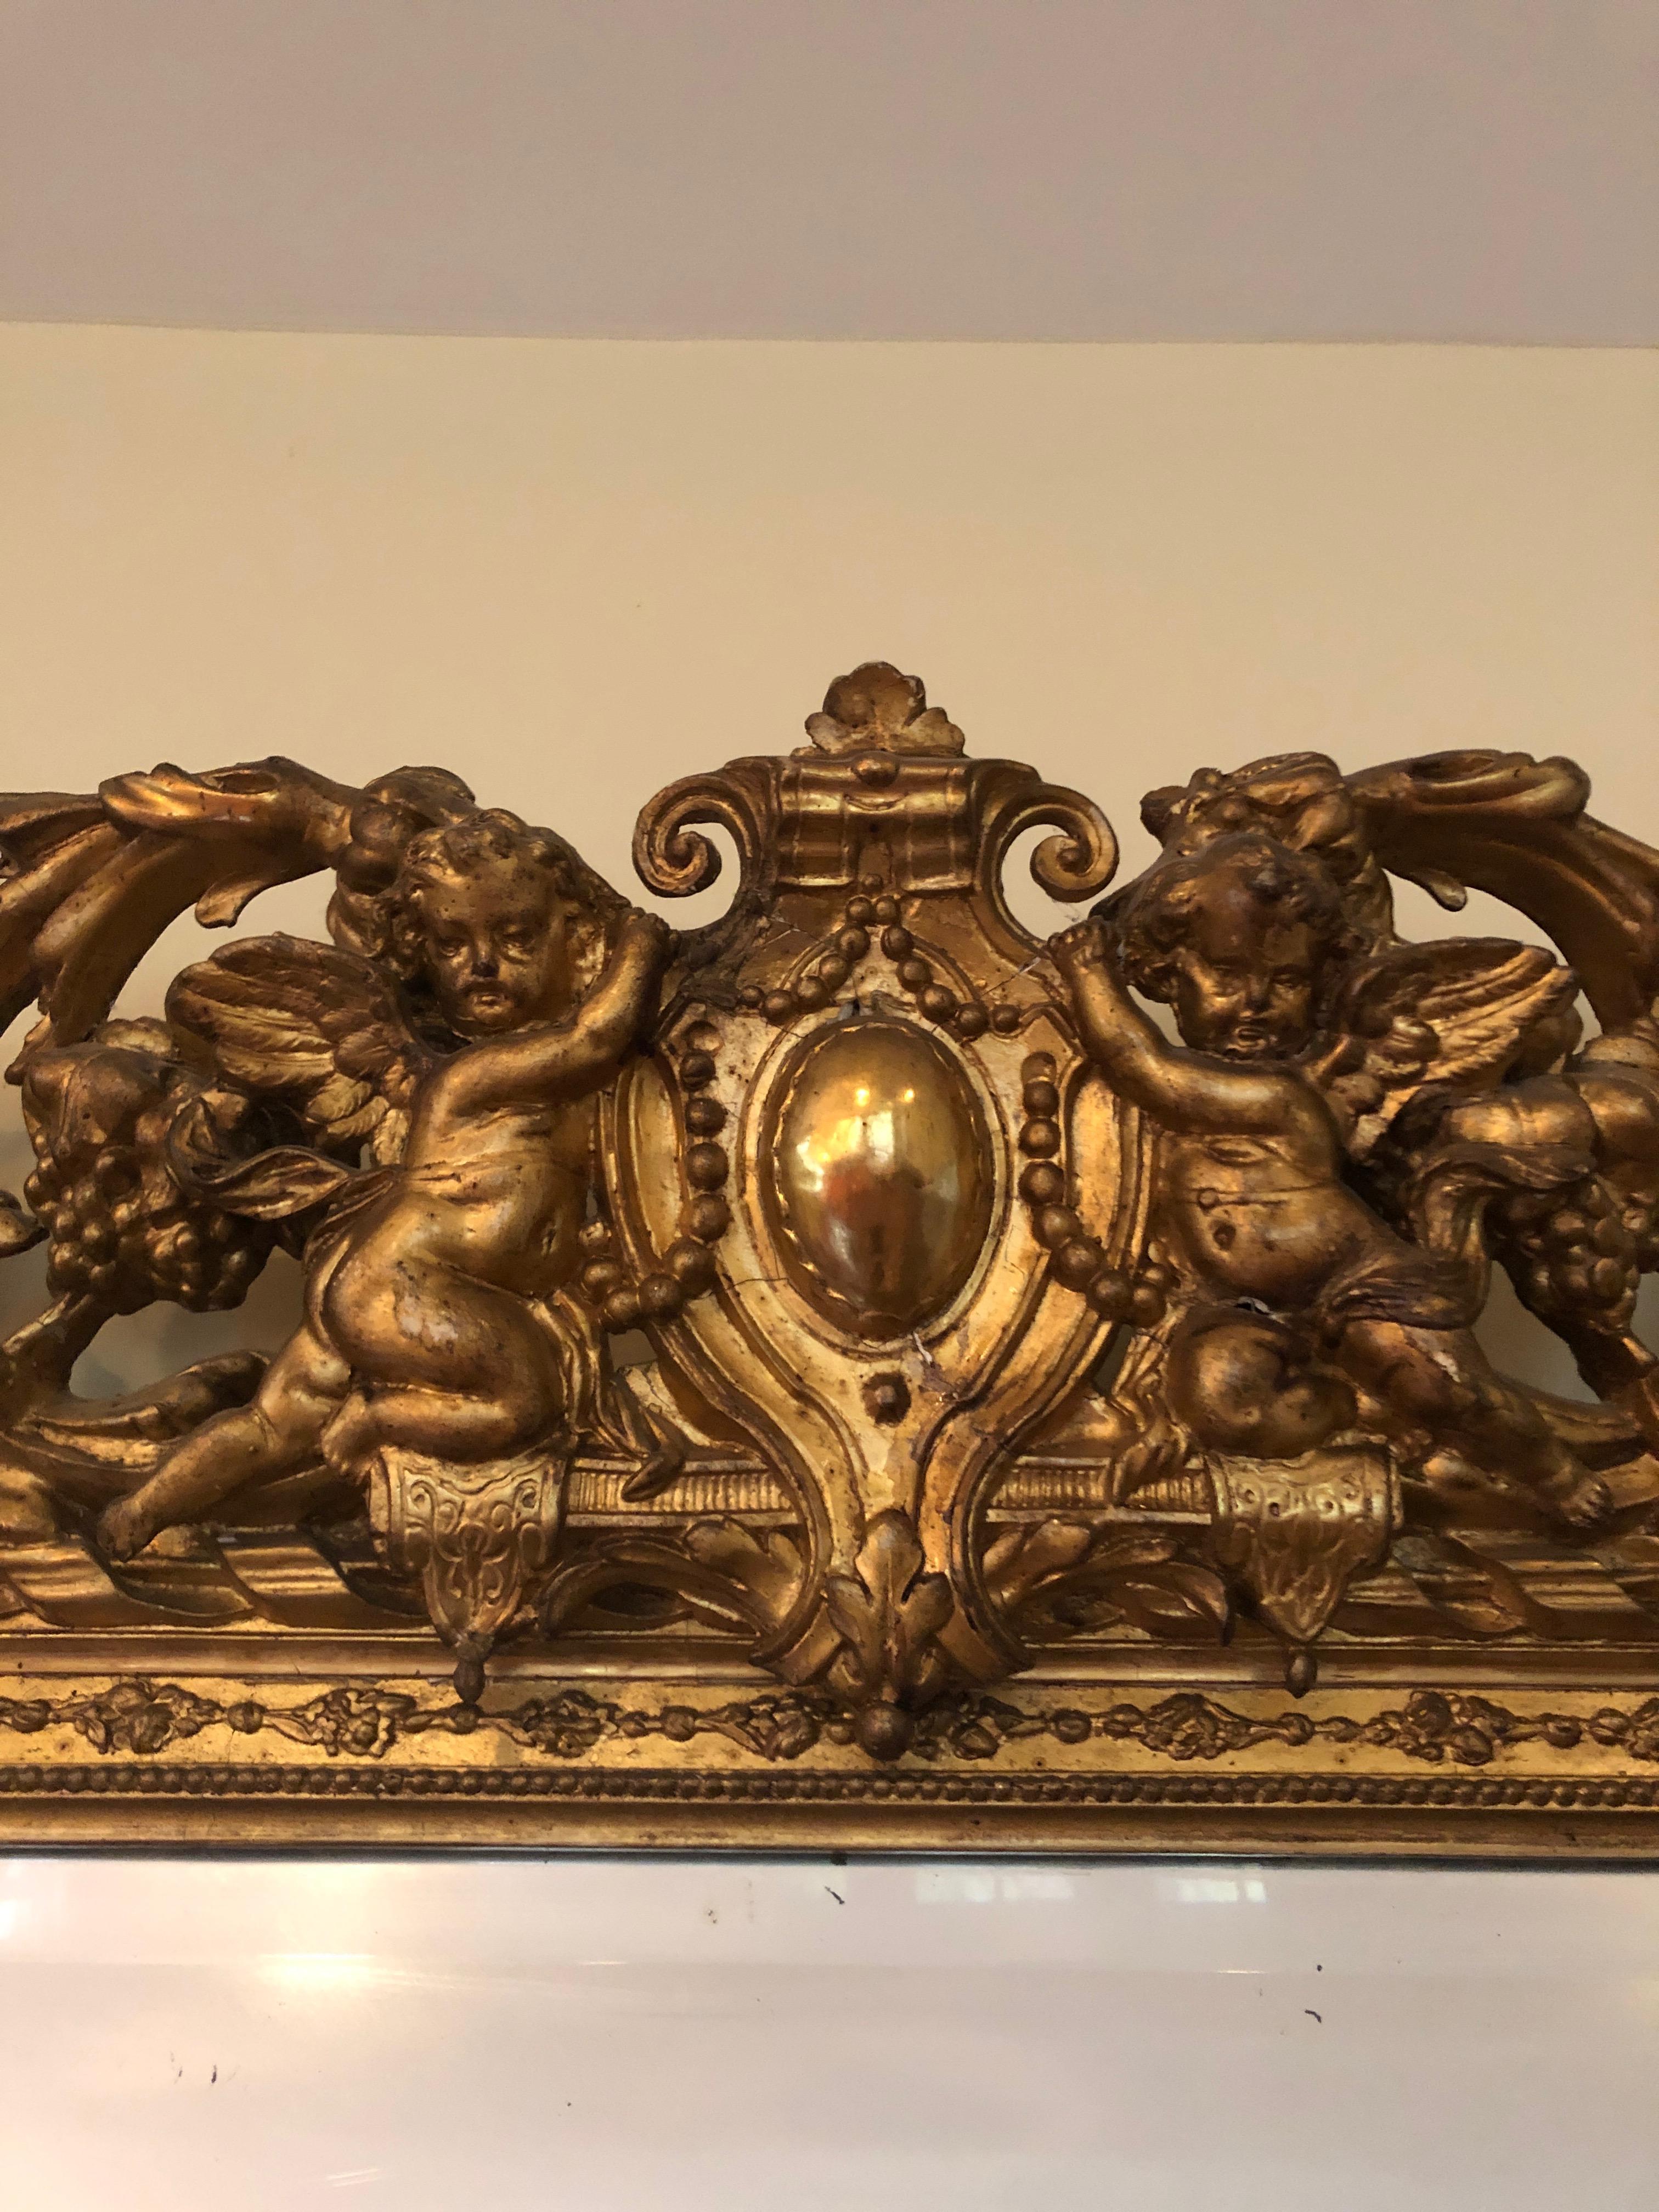 A gargantuan very impressive ornate giltwood mirror having romantic central shield at the top with two putti, lots of curlicues and fancy carvings and a huge naturally aged beveled mirror. Some losses to giltwood as shown in photos.